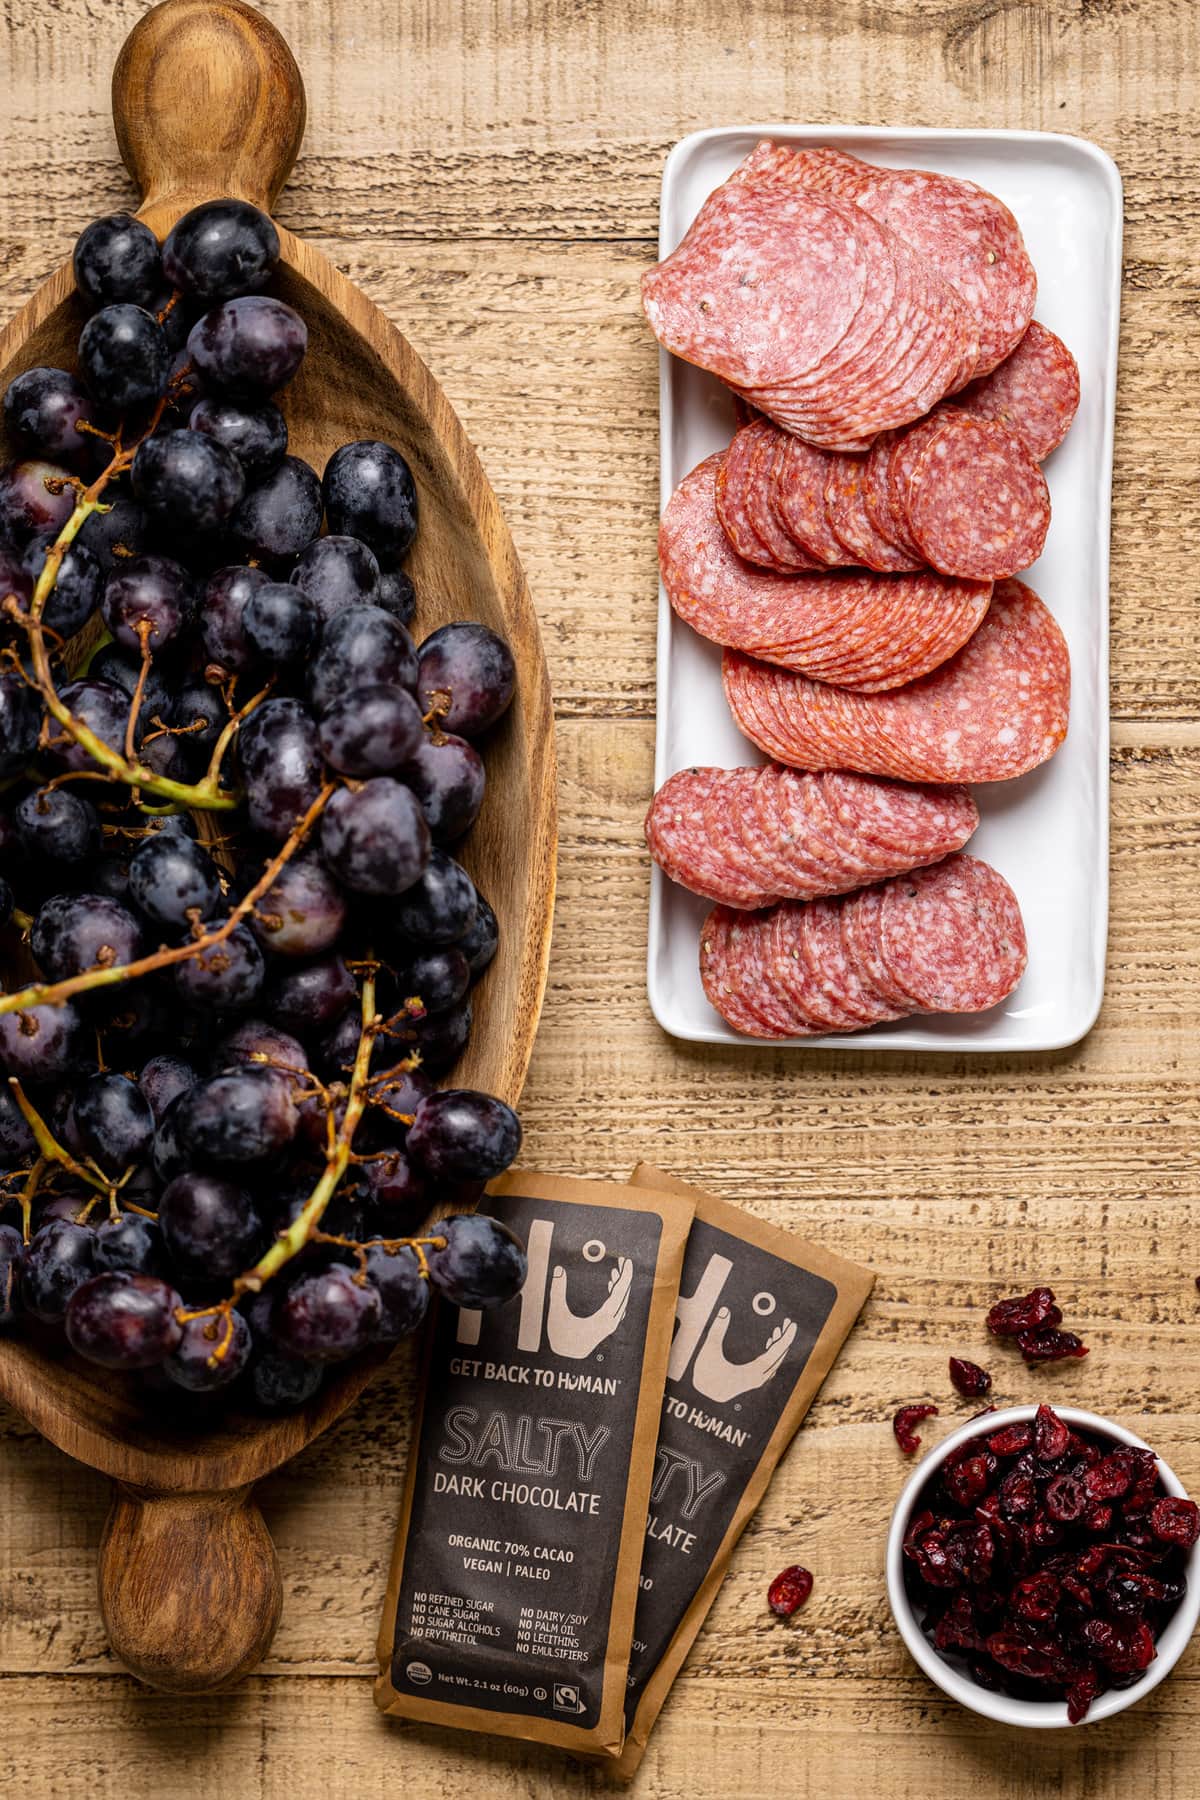 Wooden bowl of black grapes next to a plate of cured meats, bowl of dried cranberries, and Get Back to Human salty dark chocolate